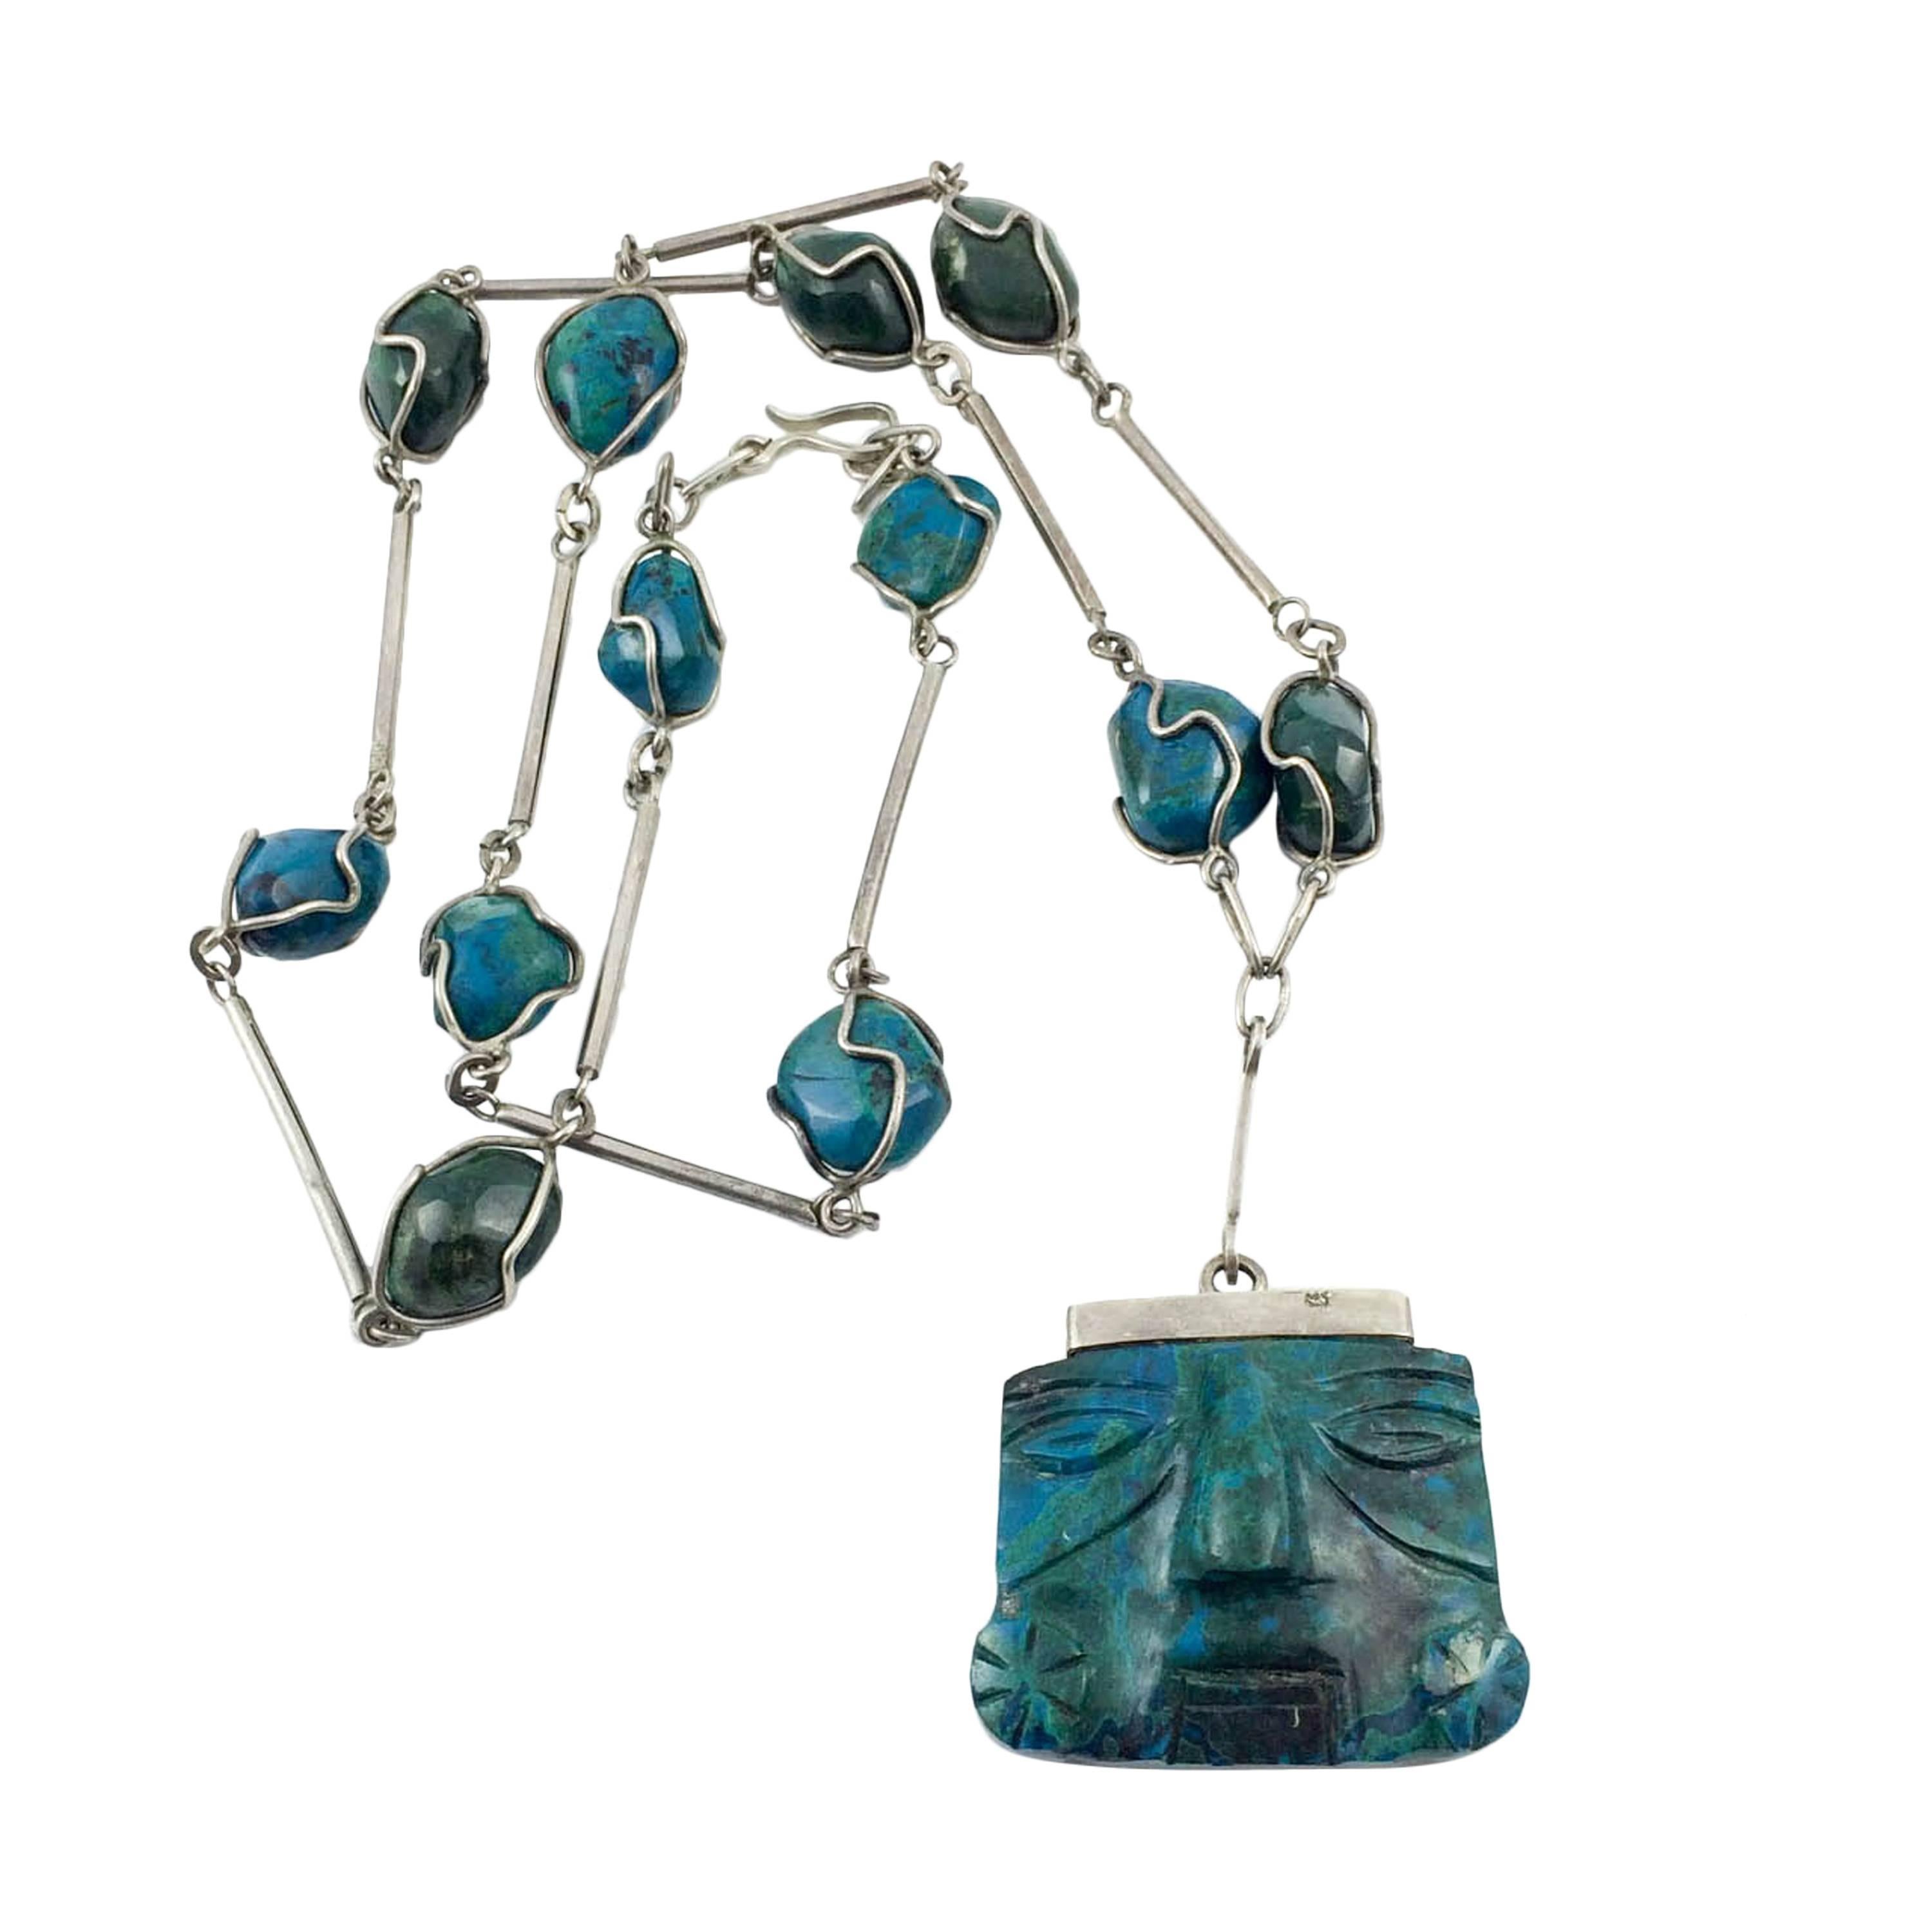 Silver and Peruvian Turquoise Necklace - 1970s